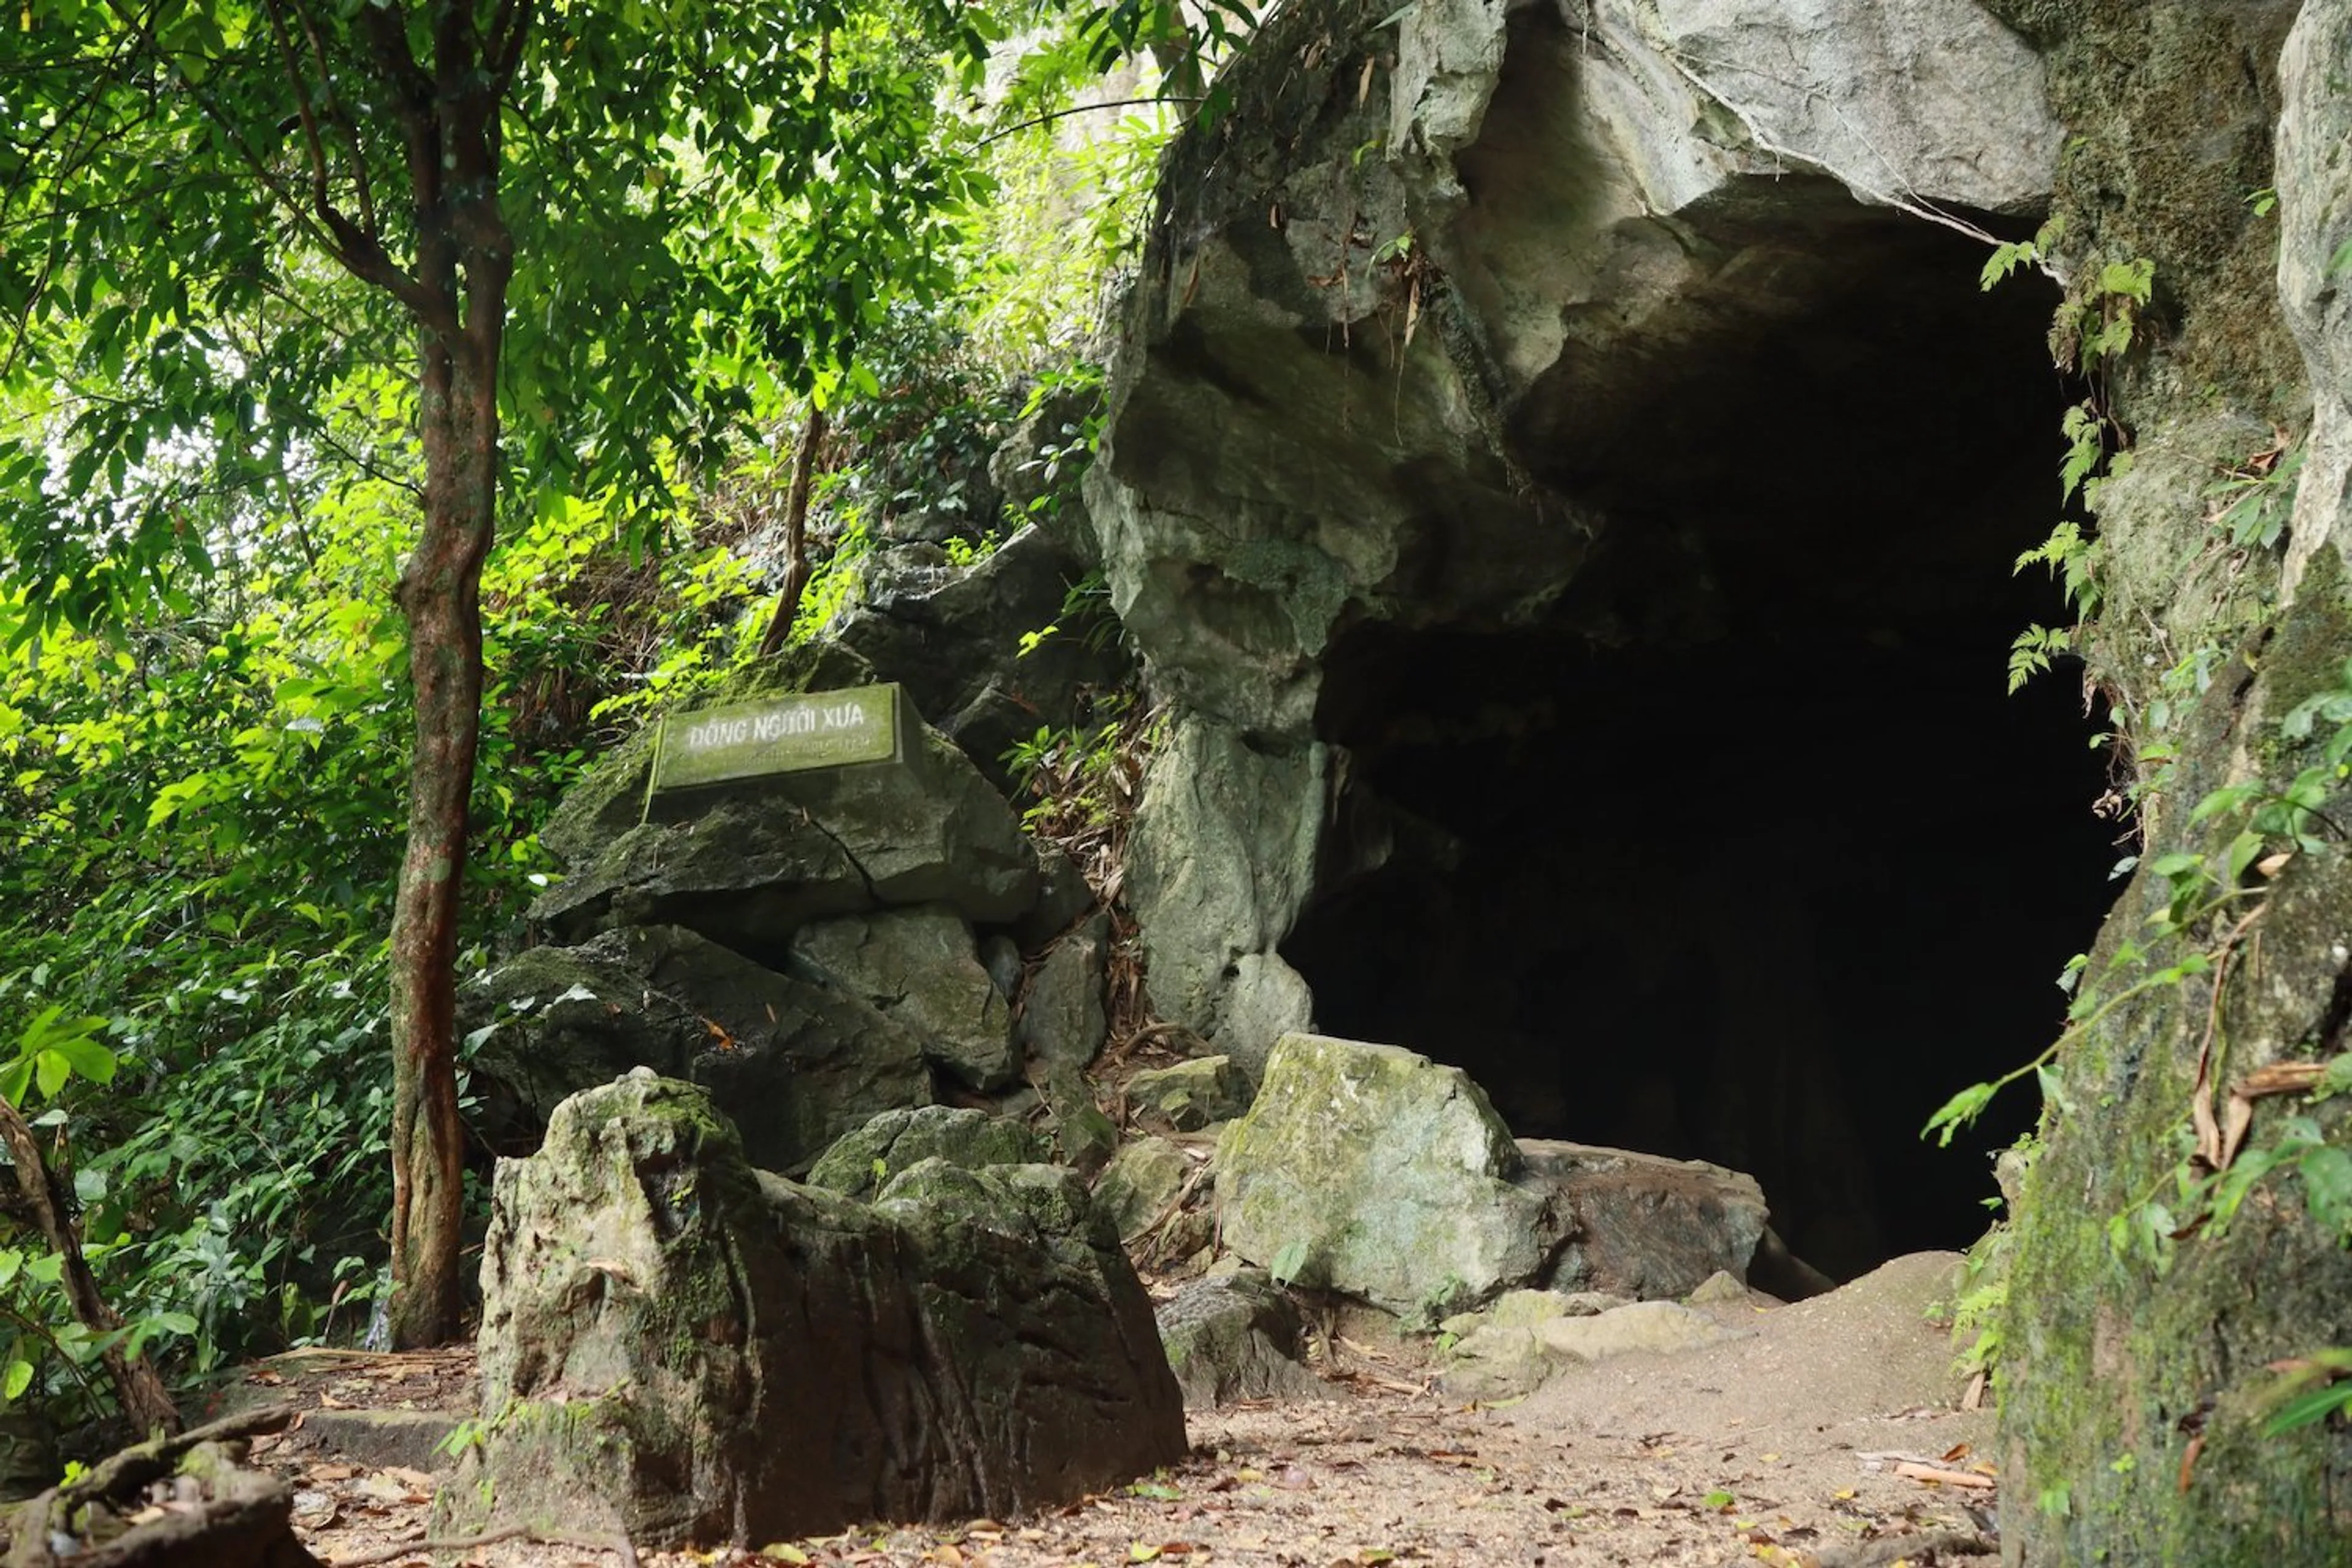 Explore the cave of ancient people at Cuc Phuong